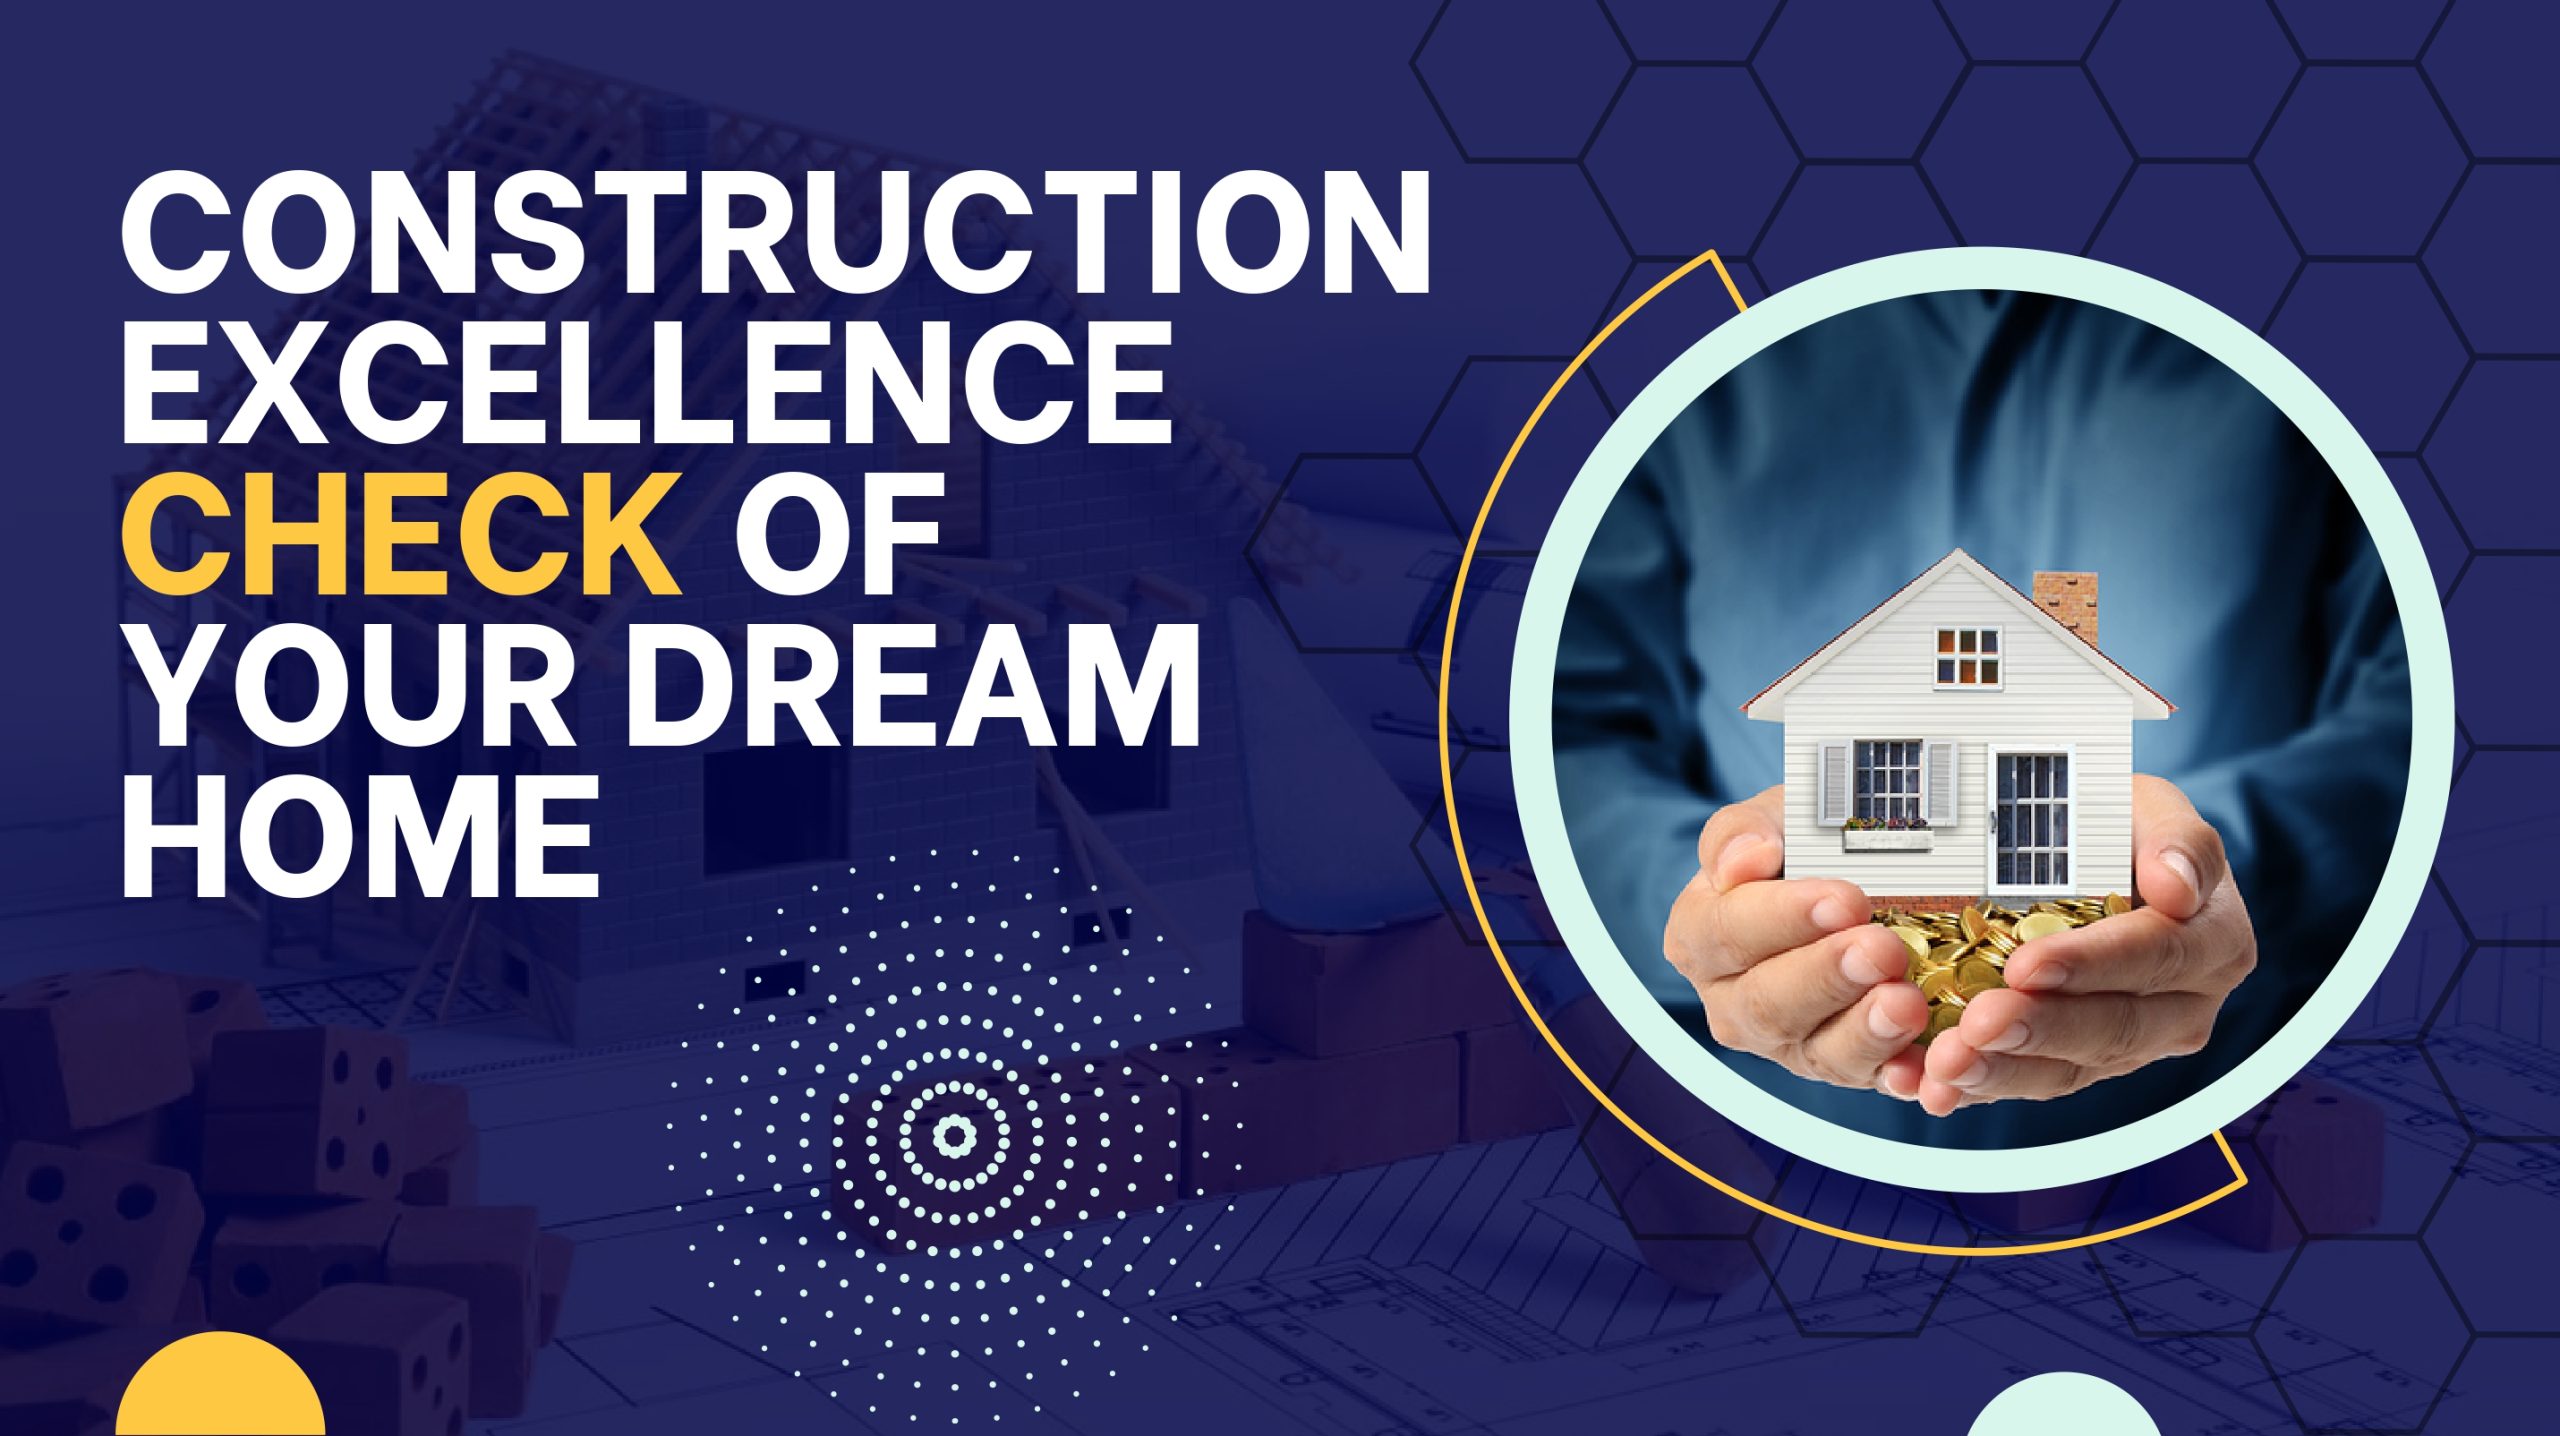 Construction Excellence Check OF Your Dream Home